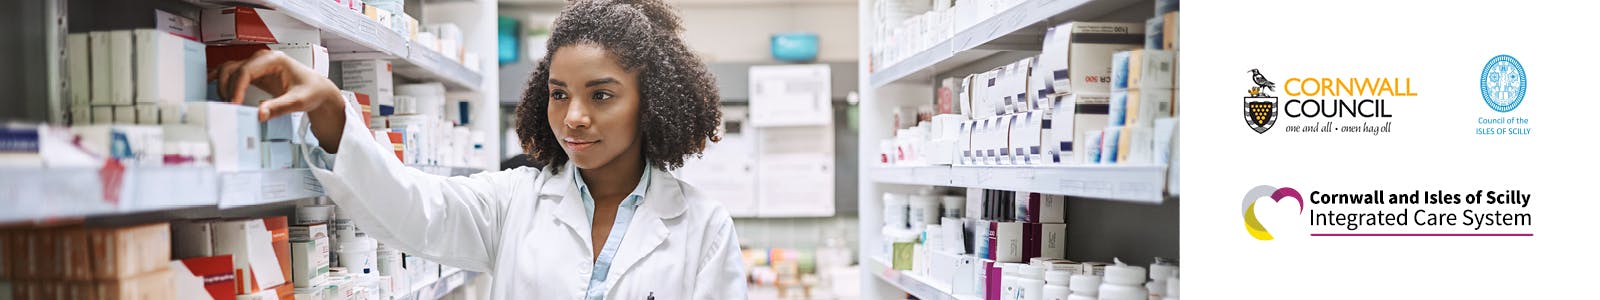 Woman selecting items from a pharmacy shelf 